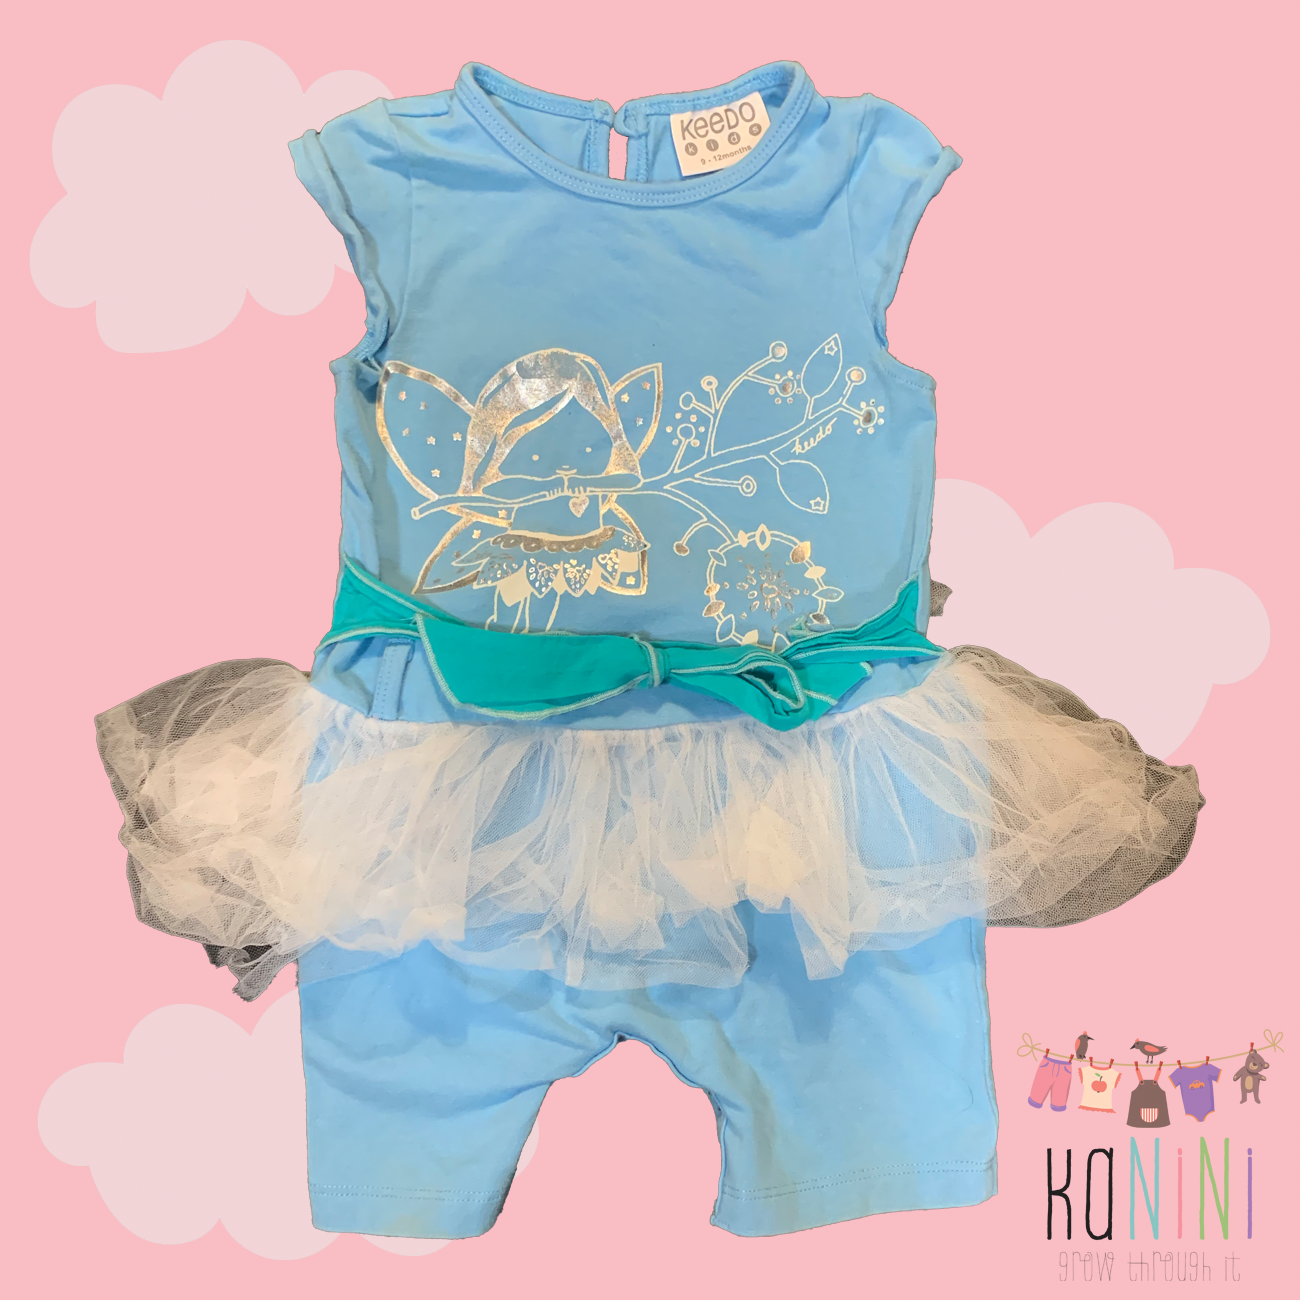 Featured image for “Keedo 6-12 Months Girls Tutu Romper”